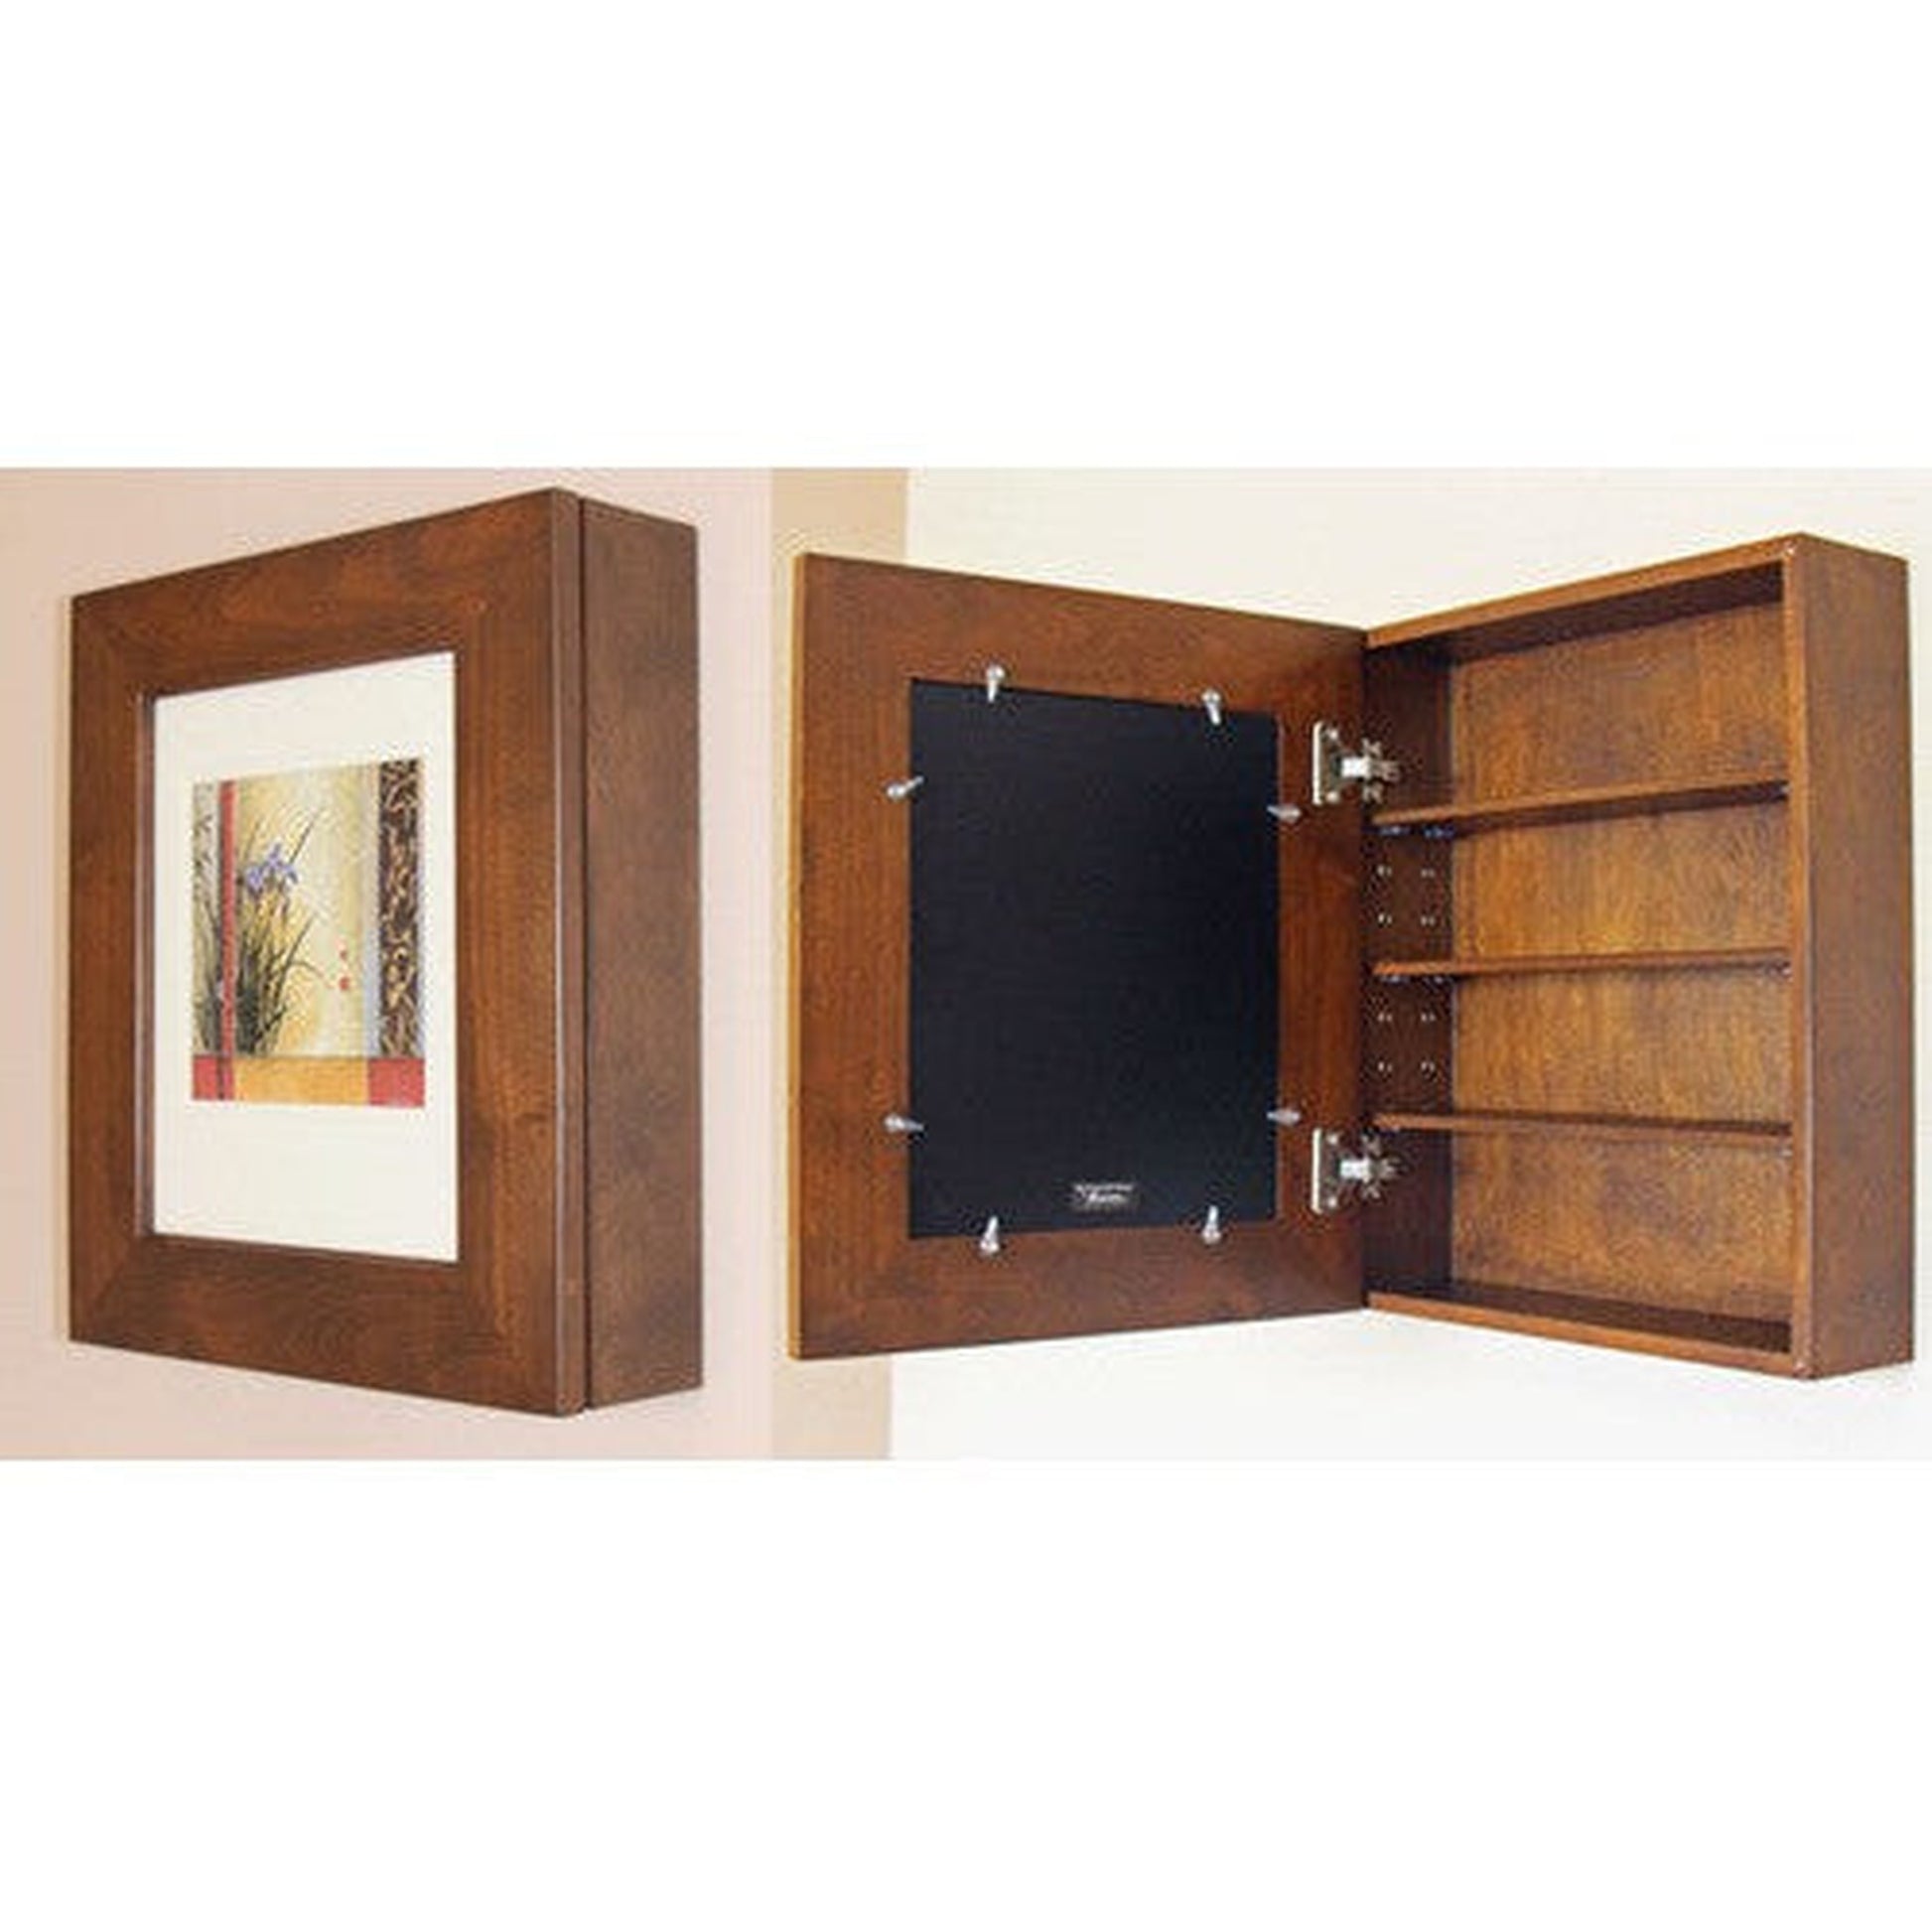 Fox Hollow Furnishings 20" x 17" Caramel Wall Mount Picture Frame Medicine Cabinet With Mirror and White 8" x 10" Matting